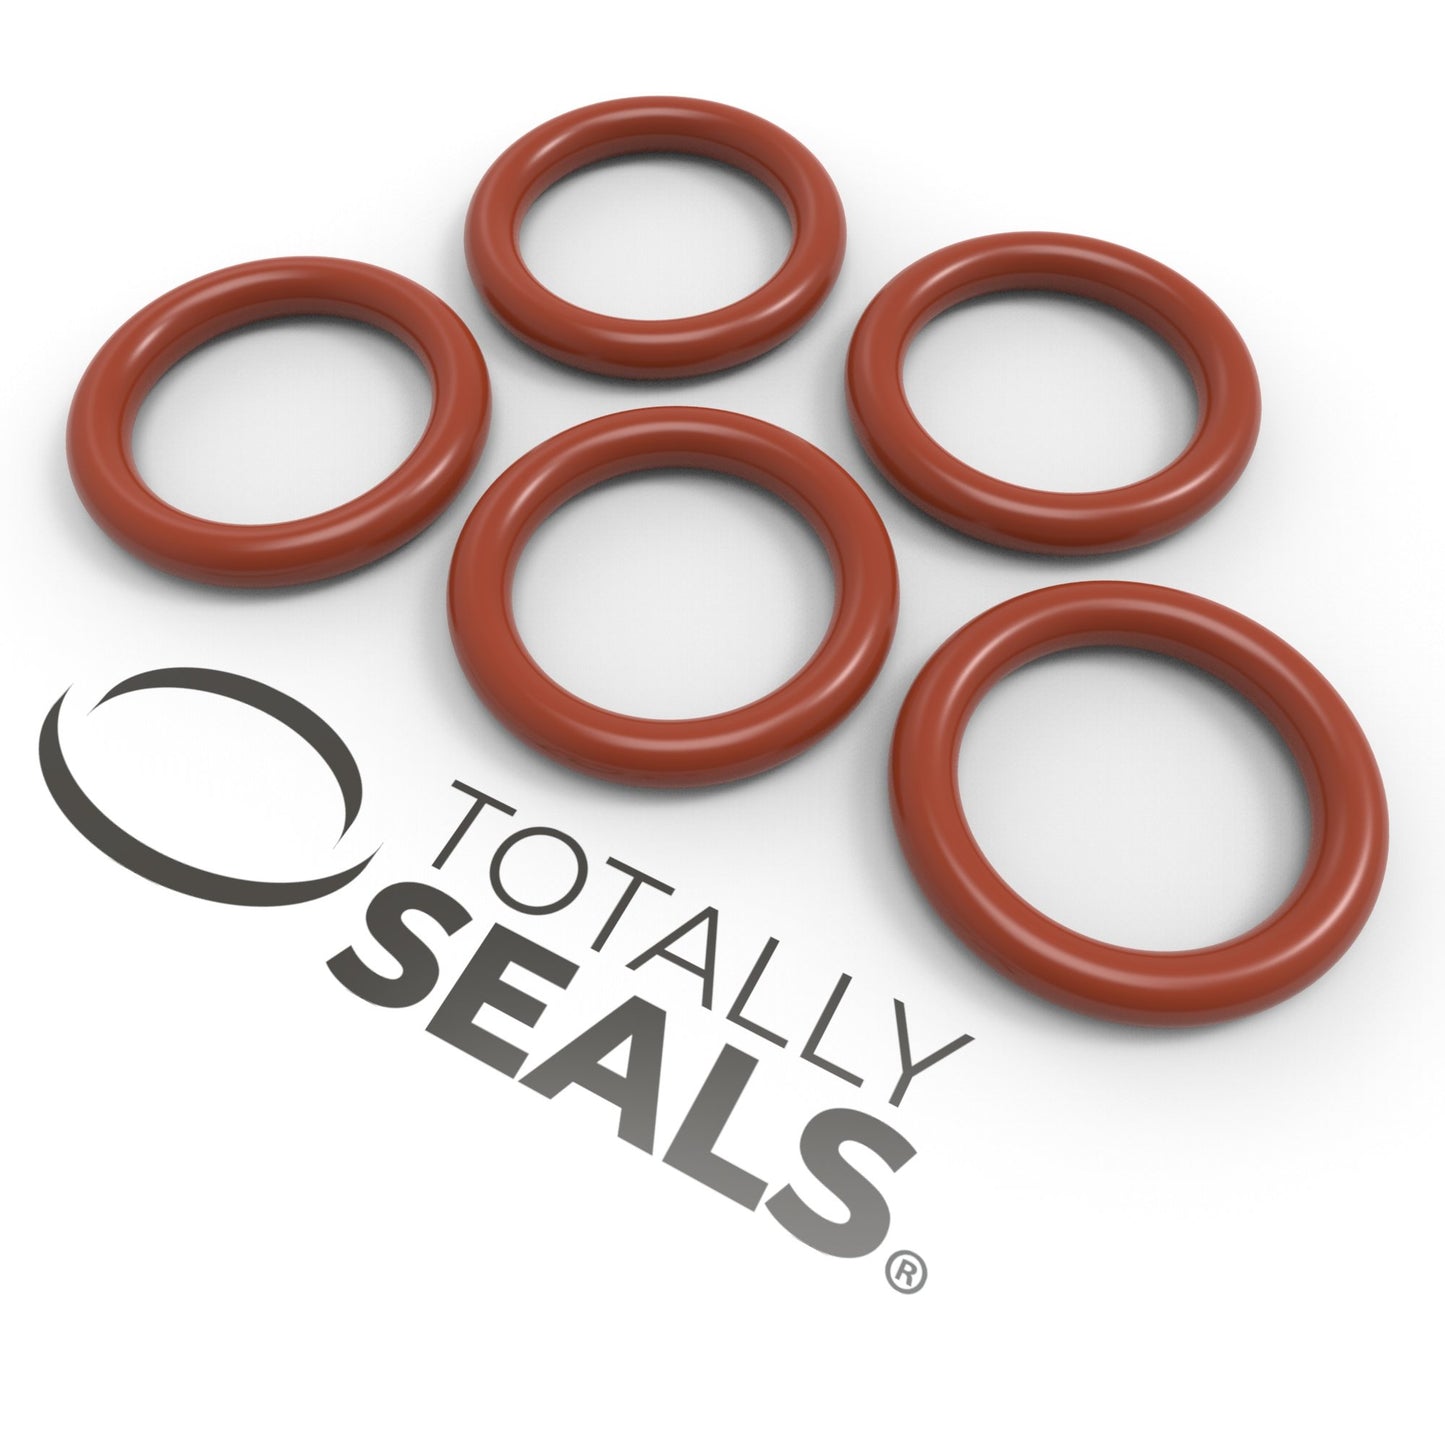 15mm x 3mm (21mm OD) Silicone O-Rings - Totally Seals®